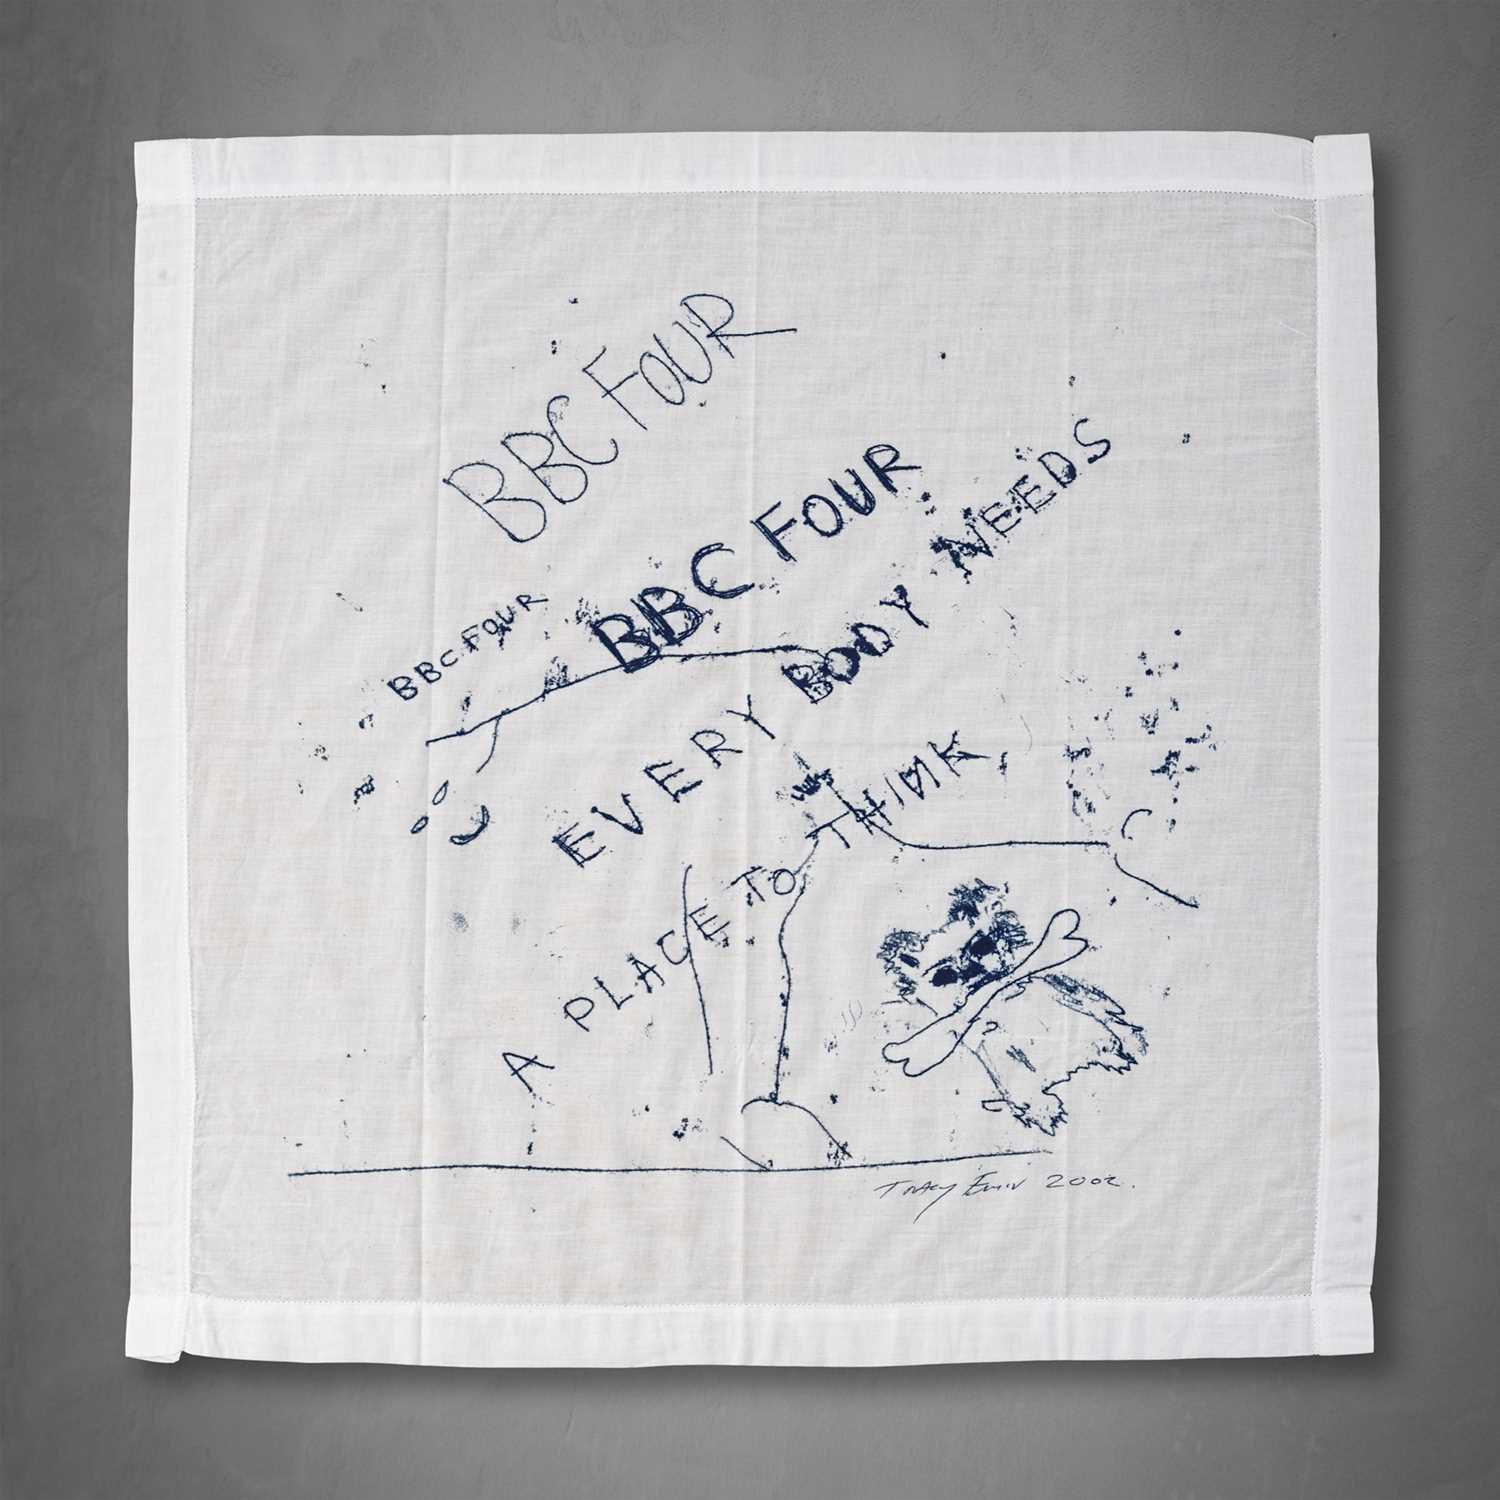 Lot 89 - Tracey Emin (British 1963-), 'Everybody Needs A Place To Think', 2002